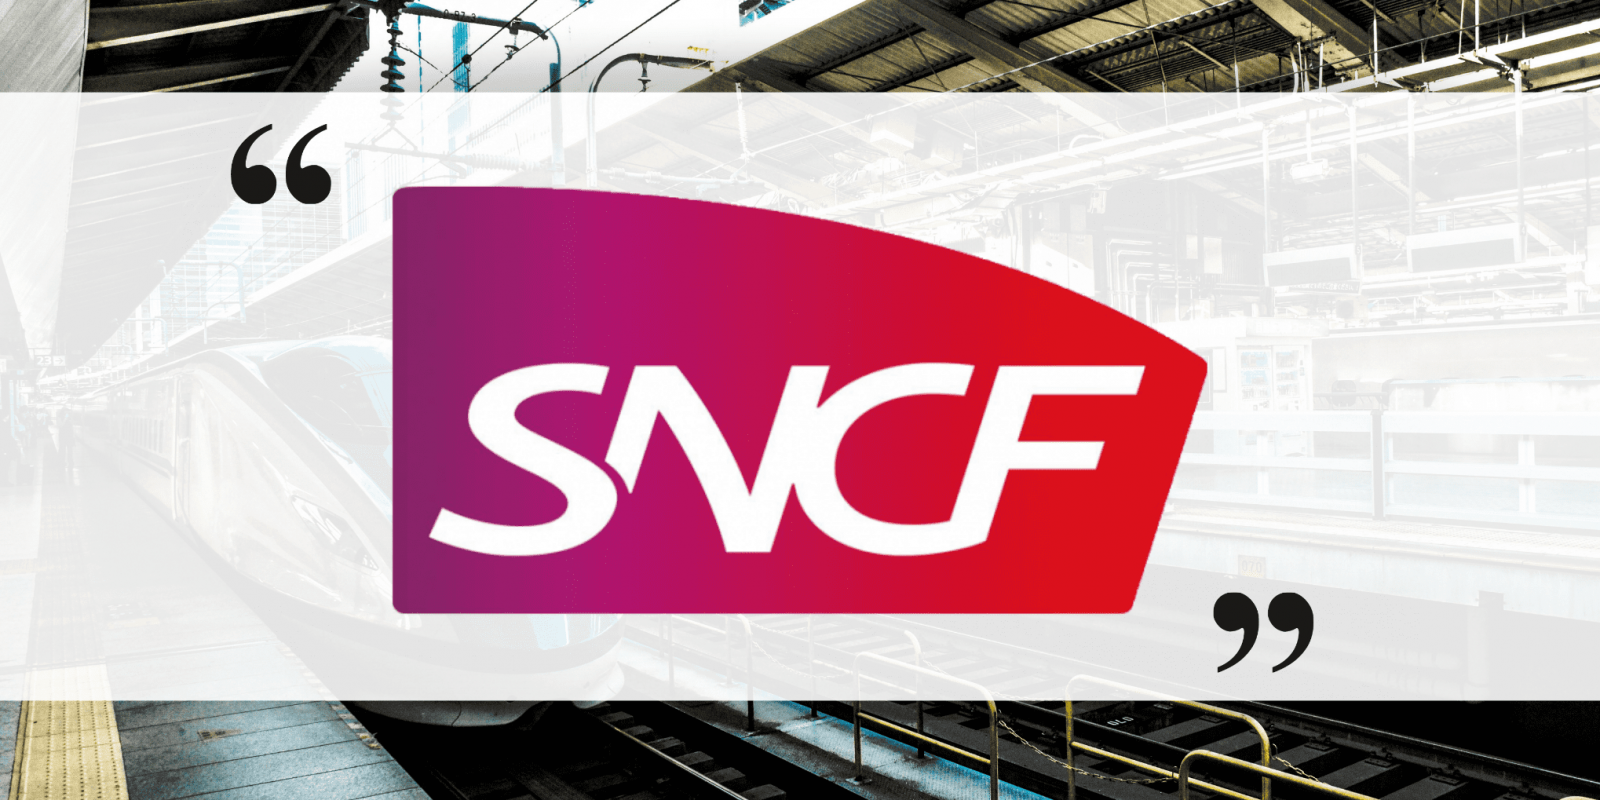 The SNCF is optimising and securing the maintenance of rail equipment by modernising its technical documentation